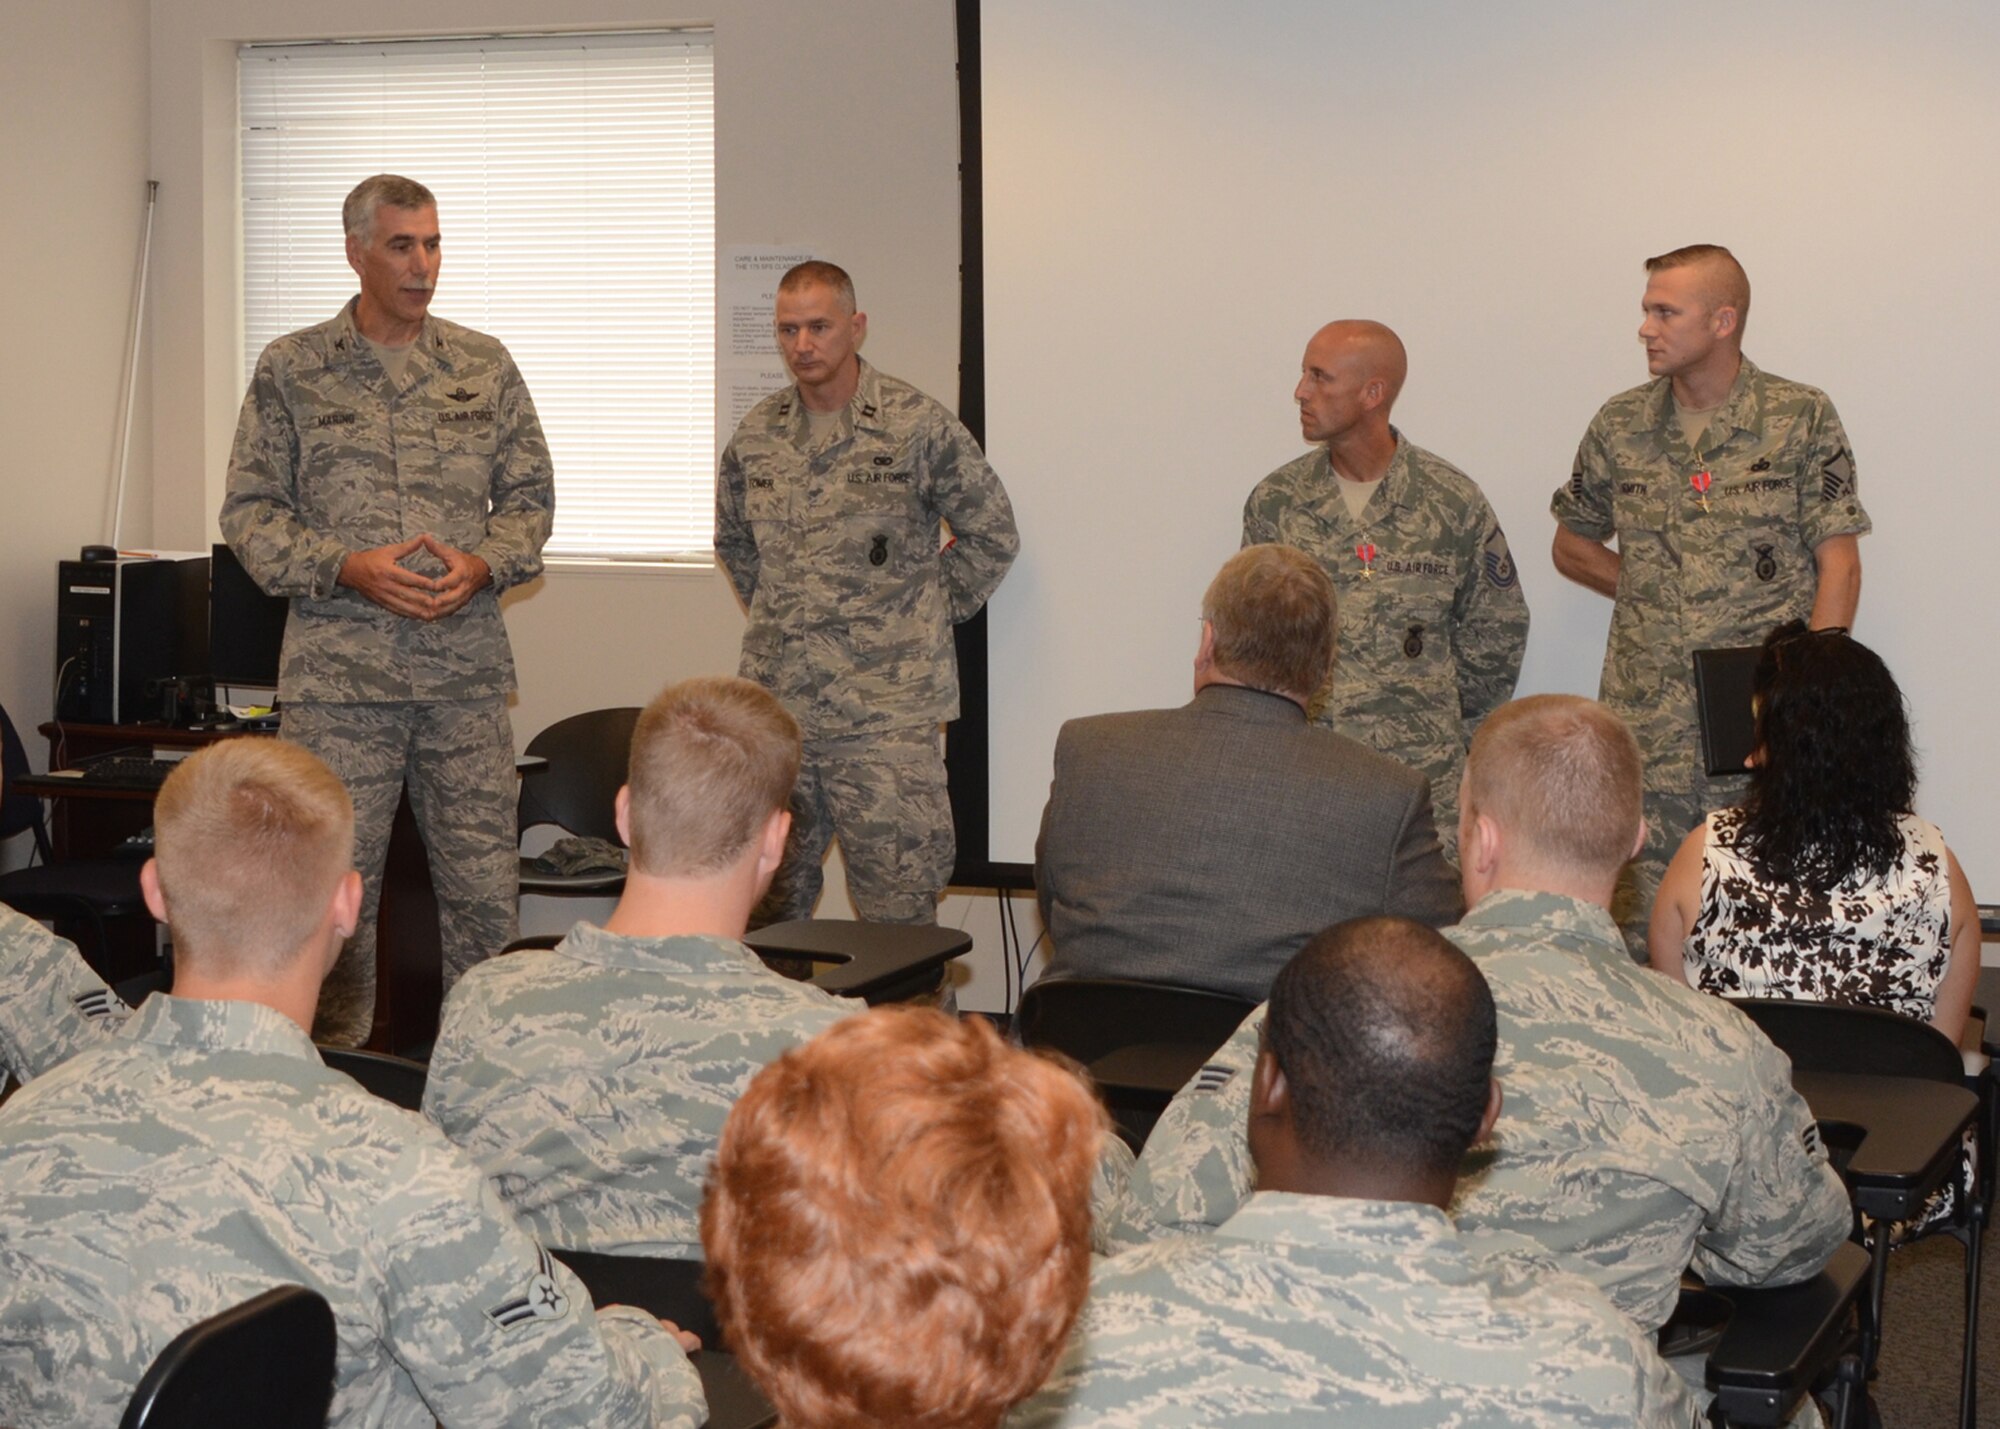 U.S. Air Force Col. Daniel Marino (left), vice commander of the 175th Wing, Maryland Air National Guard, addresses (L-R) Capt. Matthew Tower, commander of the 175th Security Forces Squadron, and Master Sgts.  John Duly and Olen D. Smith III, 175th Security Forces Squadron, after they received awards for their service while deployed.  They received their awards on August 12, 2012 at Warfield Air National Guard Base.  (National Guard photo by TSgt. Chris Schepers)